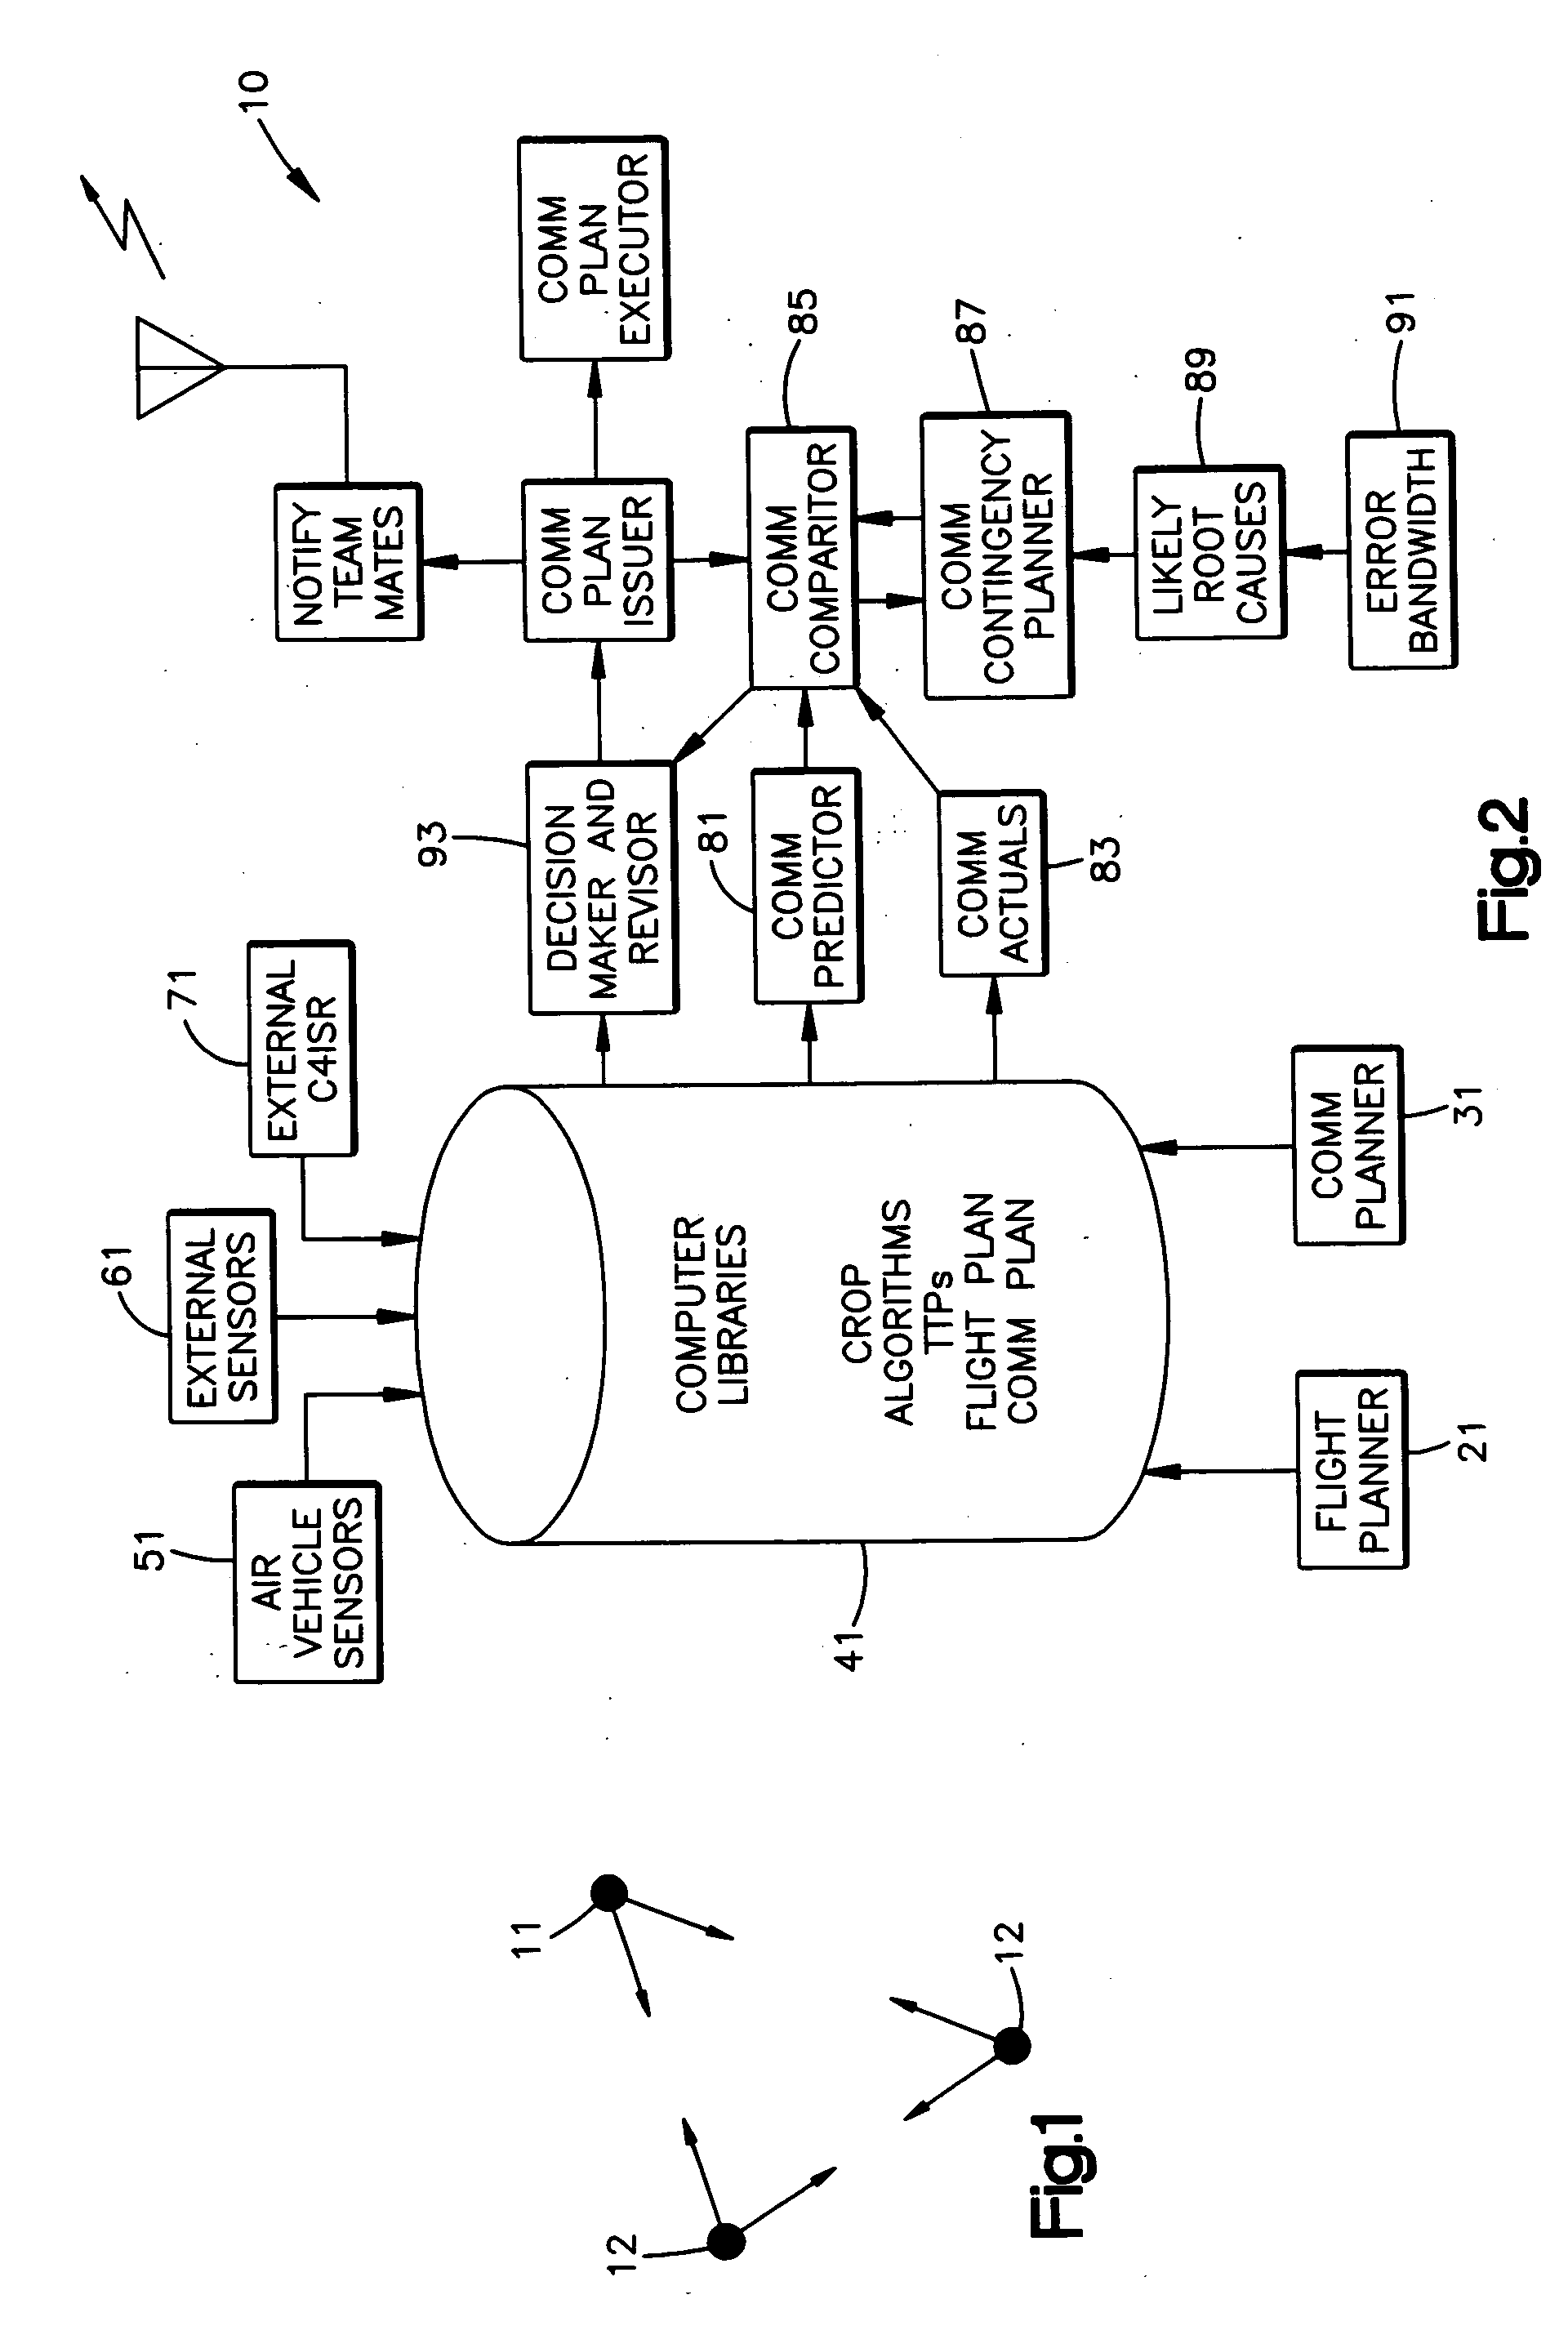 System for predictively and dynamically allocating communication bandwidth